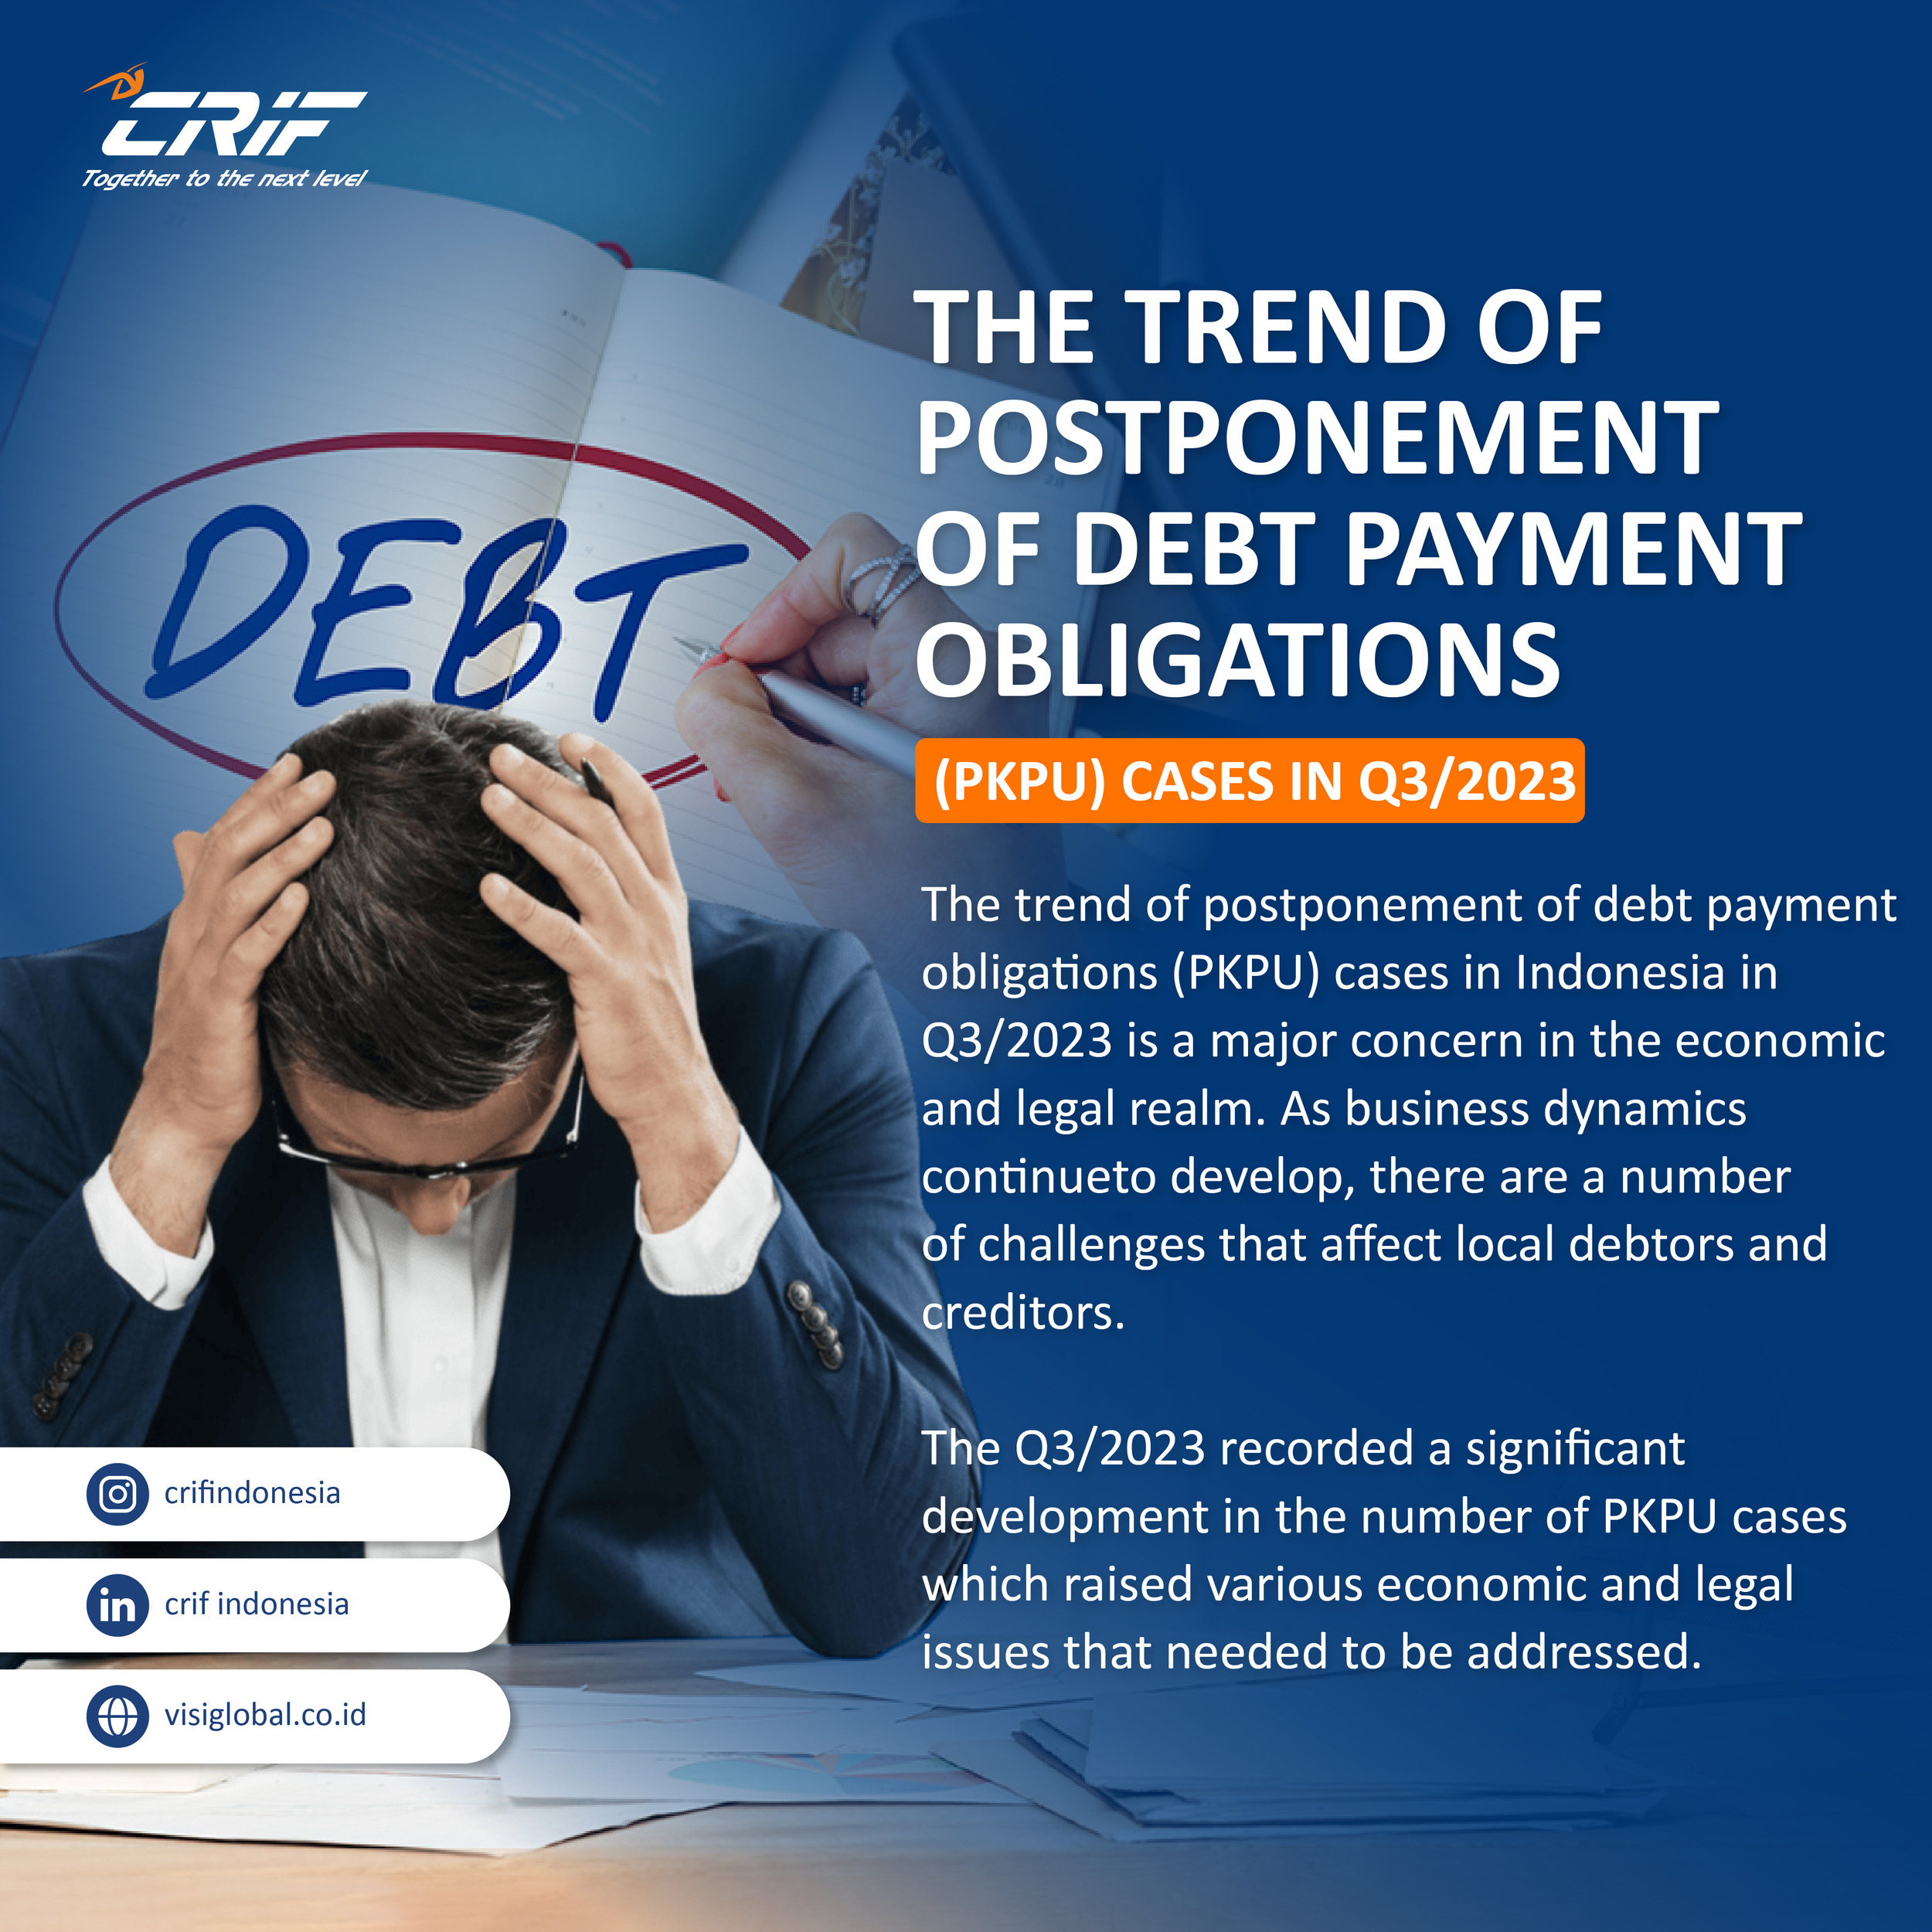 The Trend of Postponement of Debt Payment Obligations (PKPU) Cases in Q3/2023